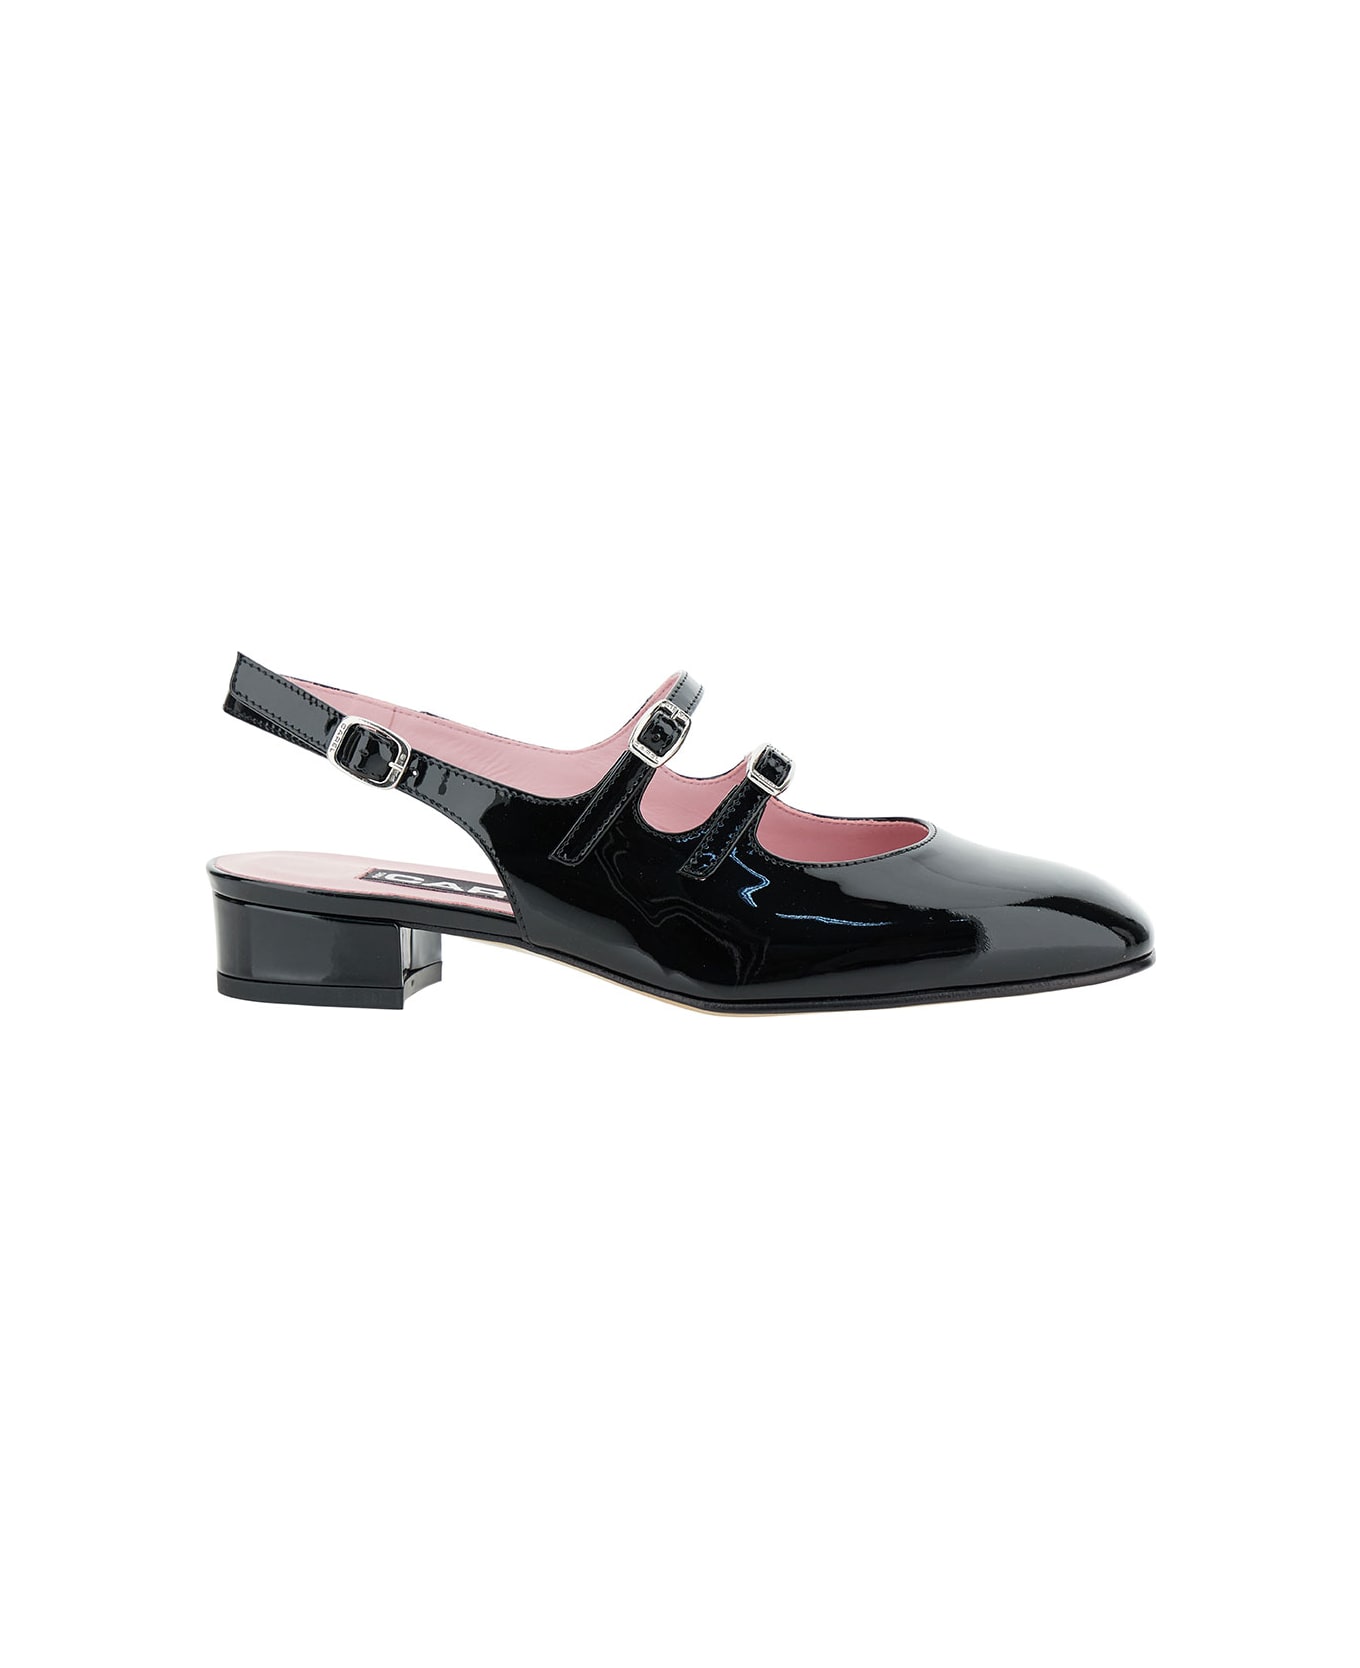 Carel Black Slingback Mary Janes With Block Heel In Patent Leather Woman - Black